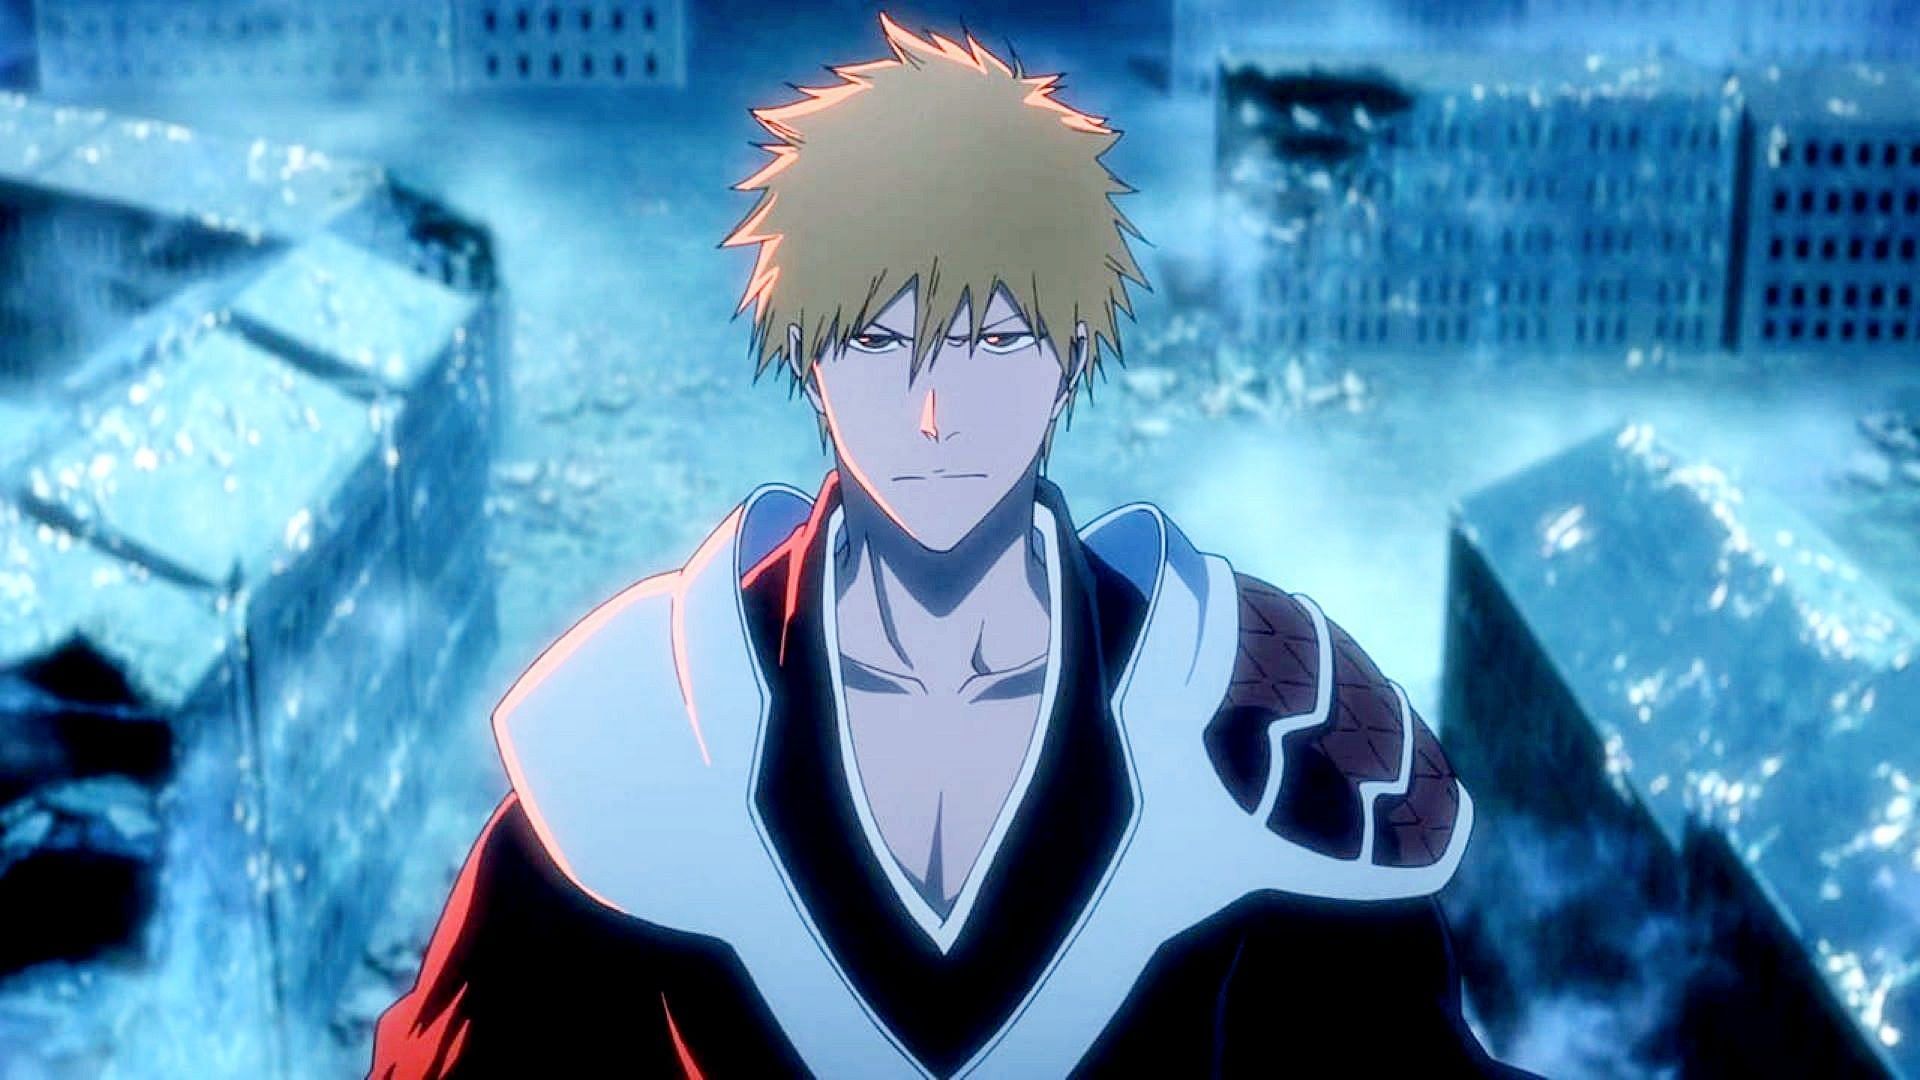 Started watching bleach 2 months ago.I ve come to ep 293 and this